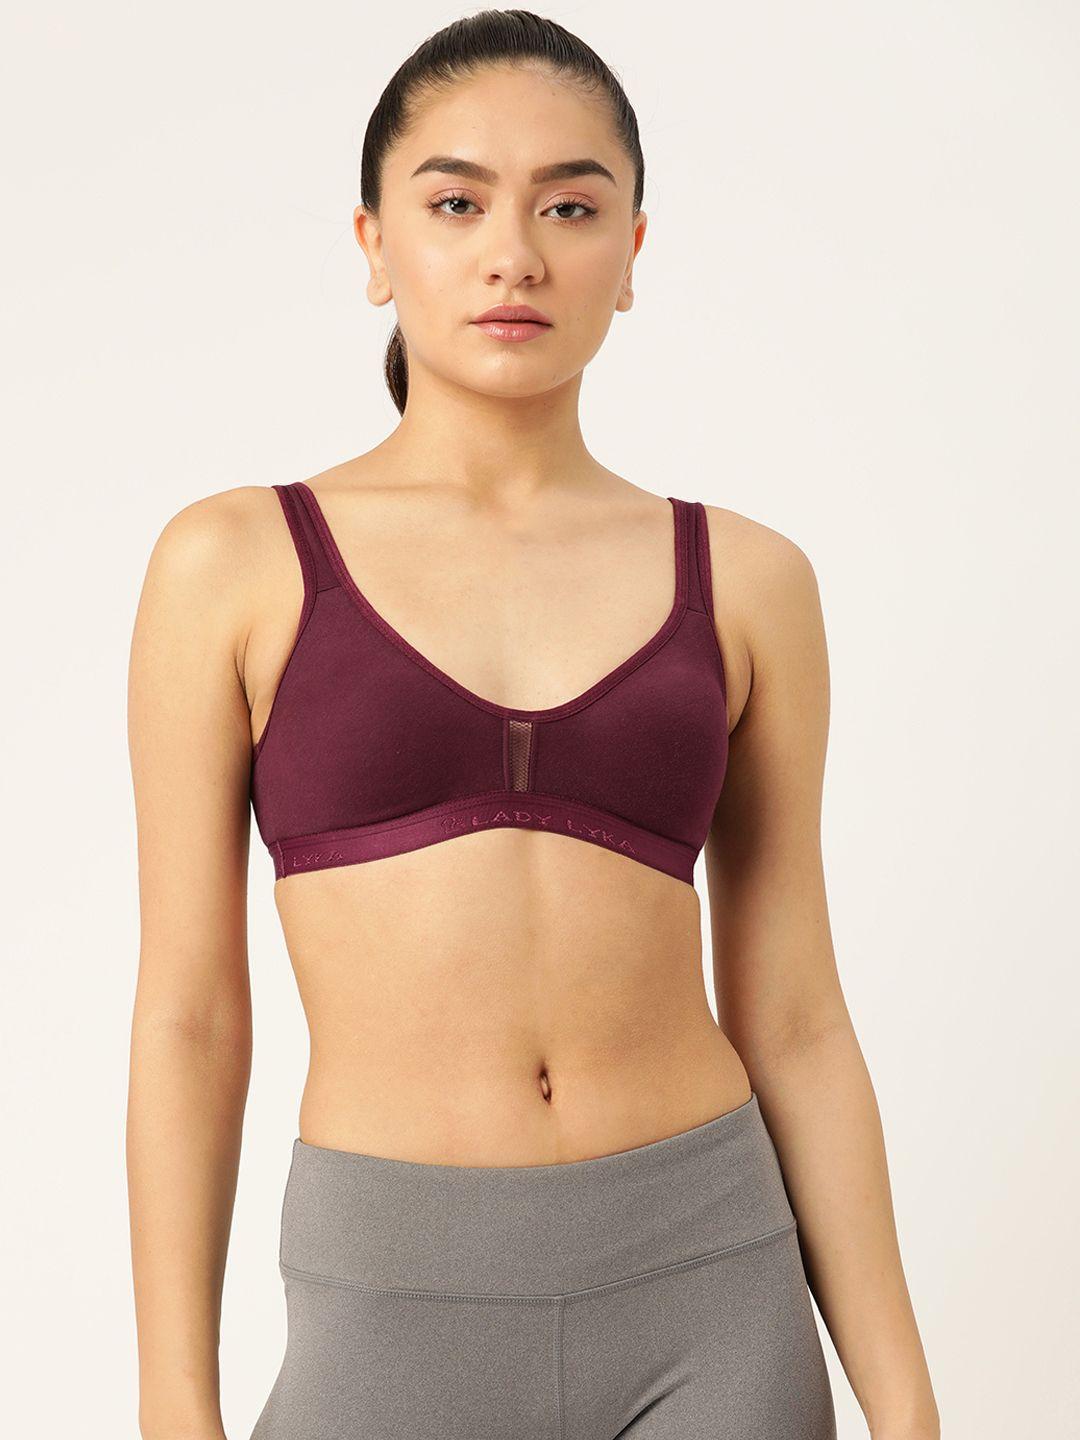 lady lyka burgundy solid cotton workout bra-full coverage non-wired non padded